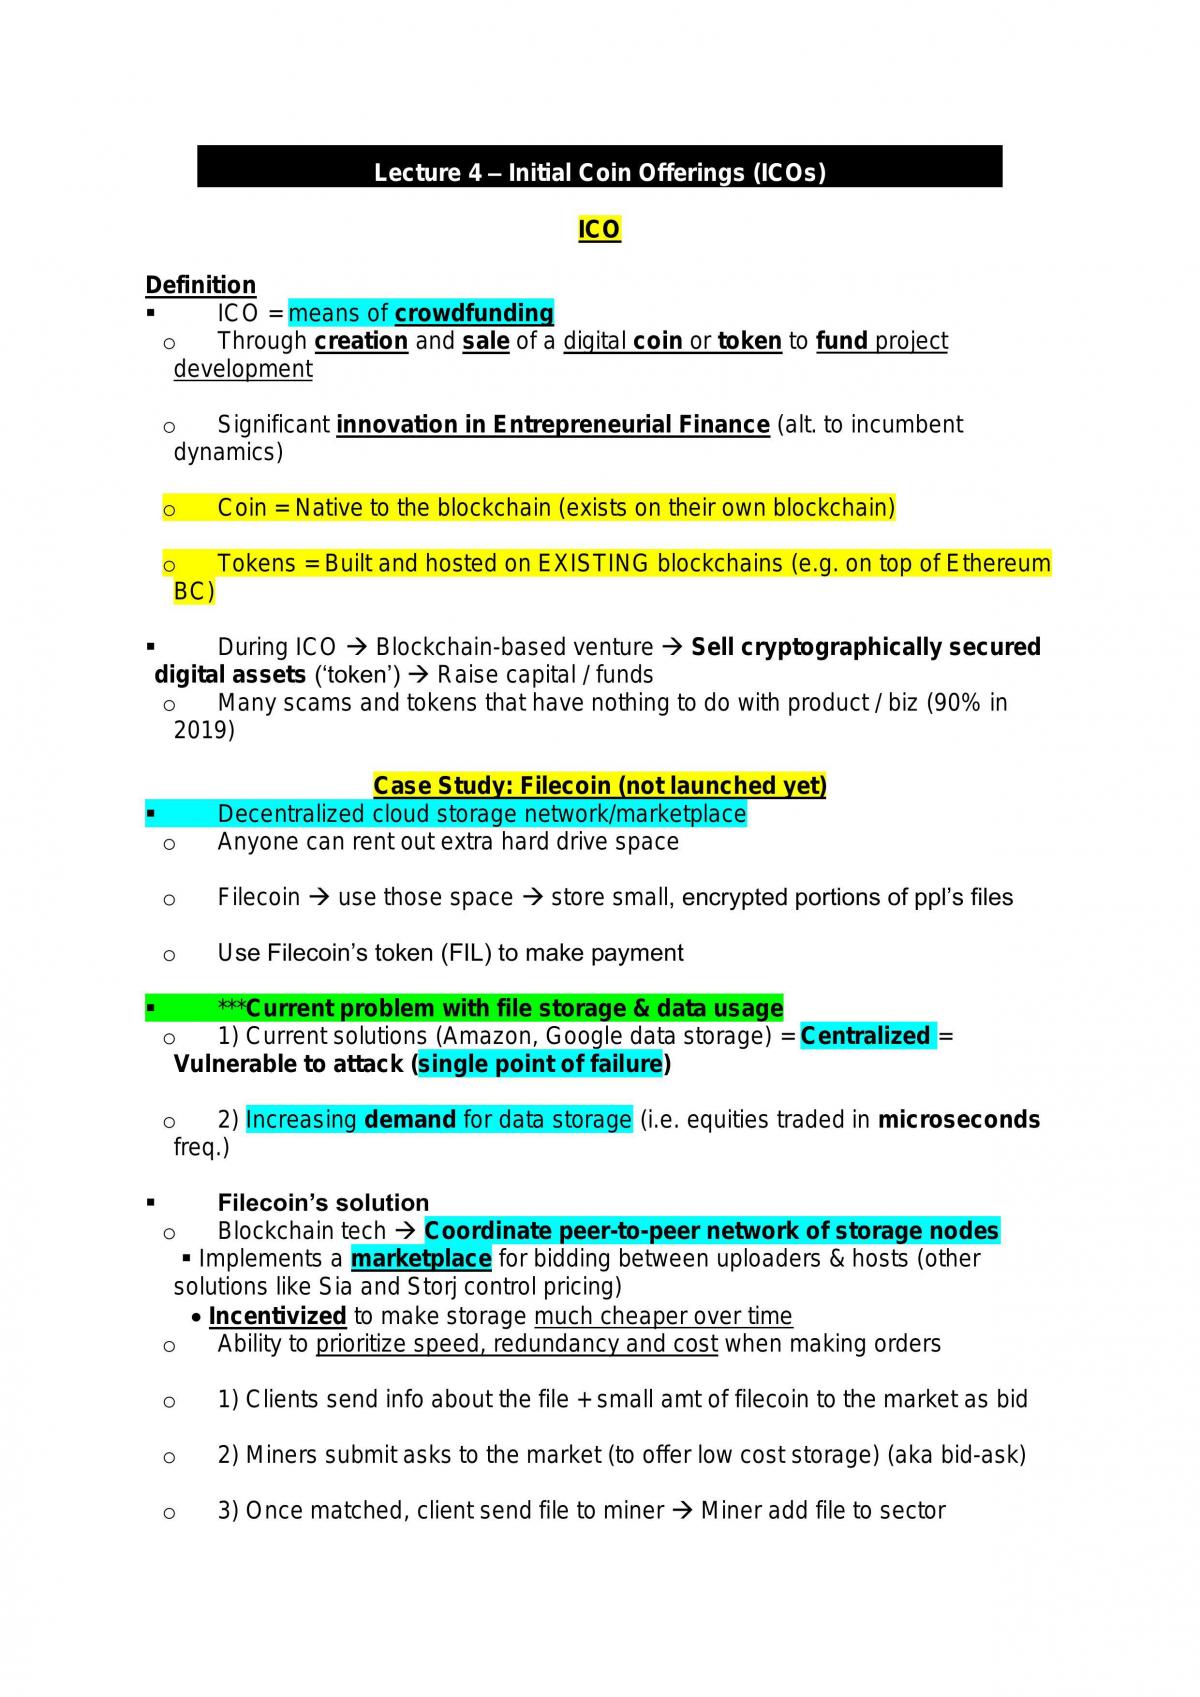 BF2214 - FinTech in Investment Management complete notes - Page 1